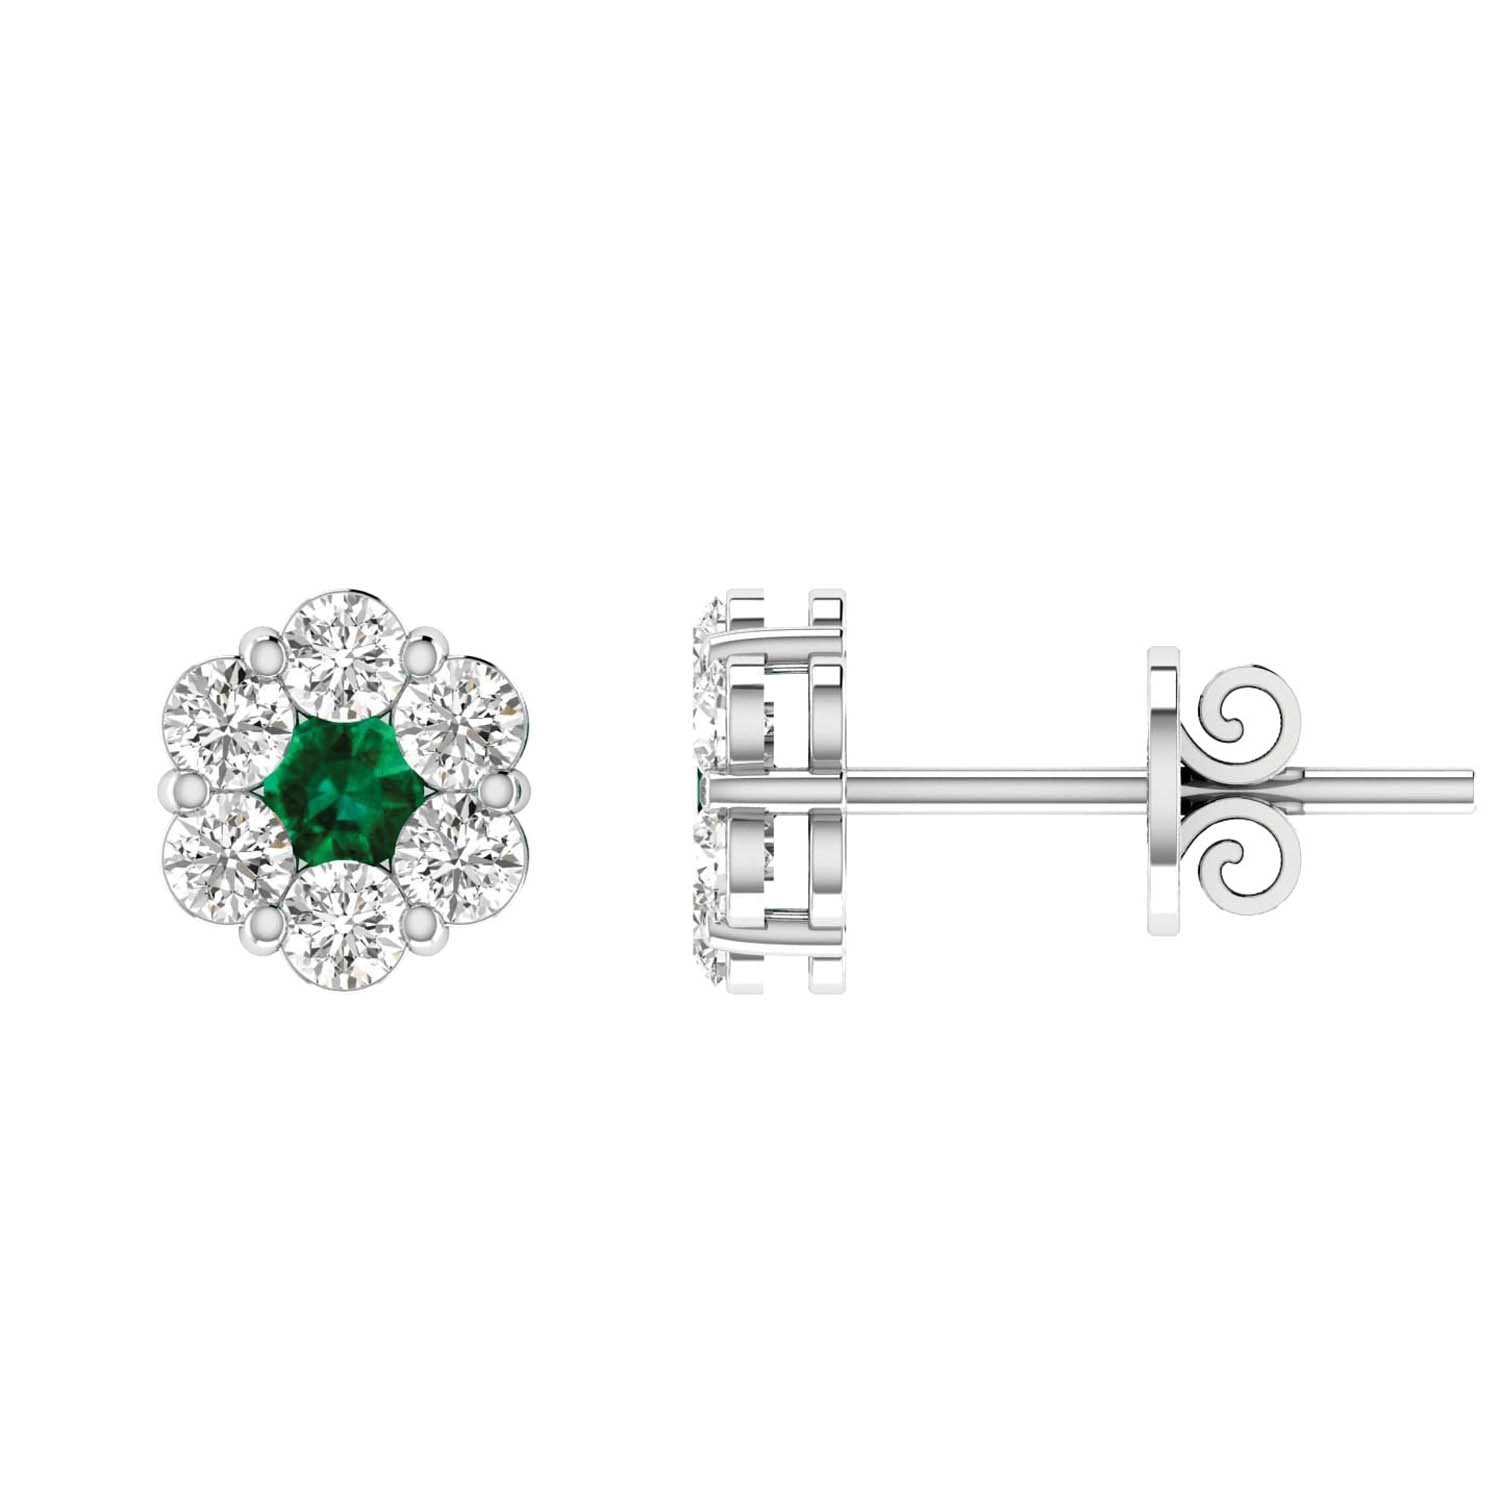 Emerald Diamond Stud Earrings with 0.19ct Diamonds in 9K White Gold - 9WRE25GHE